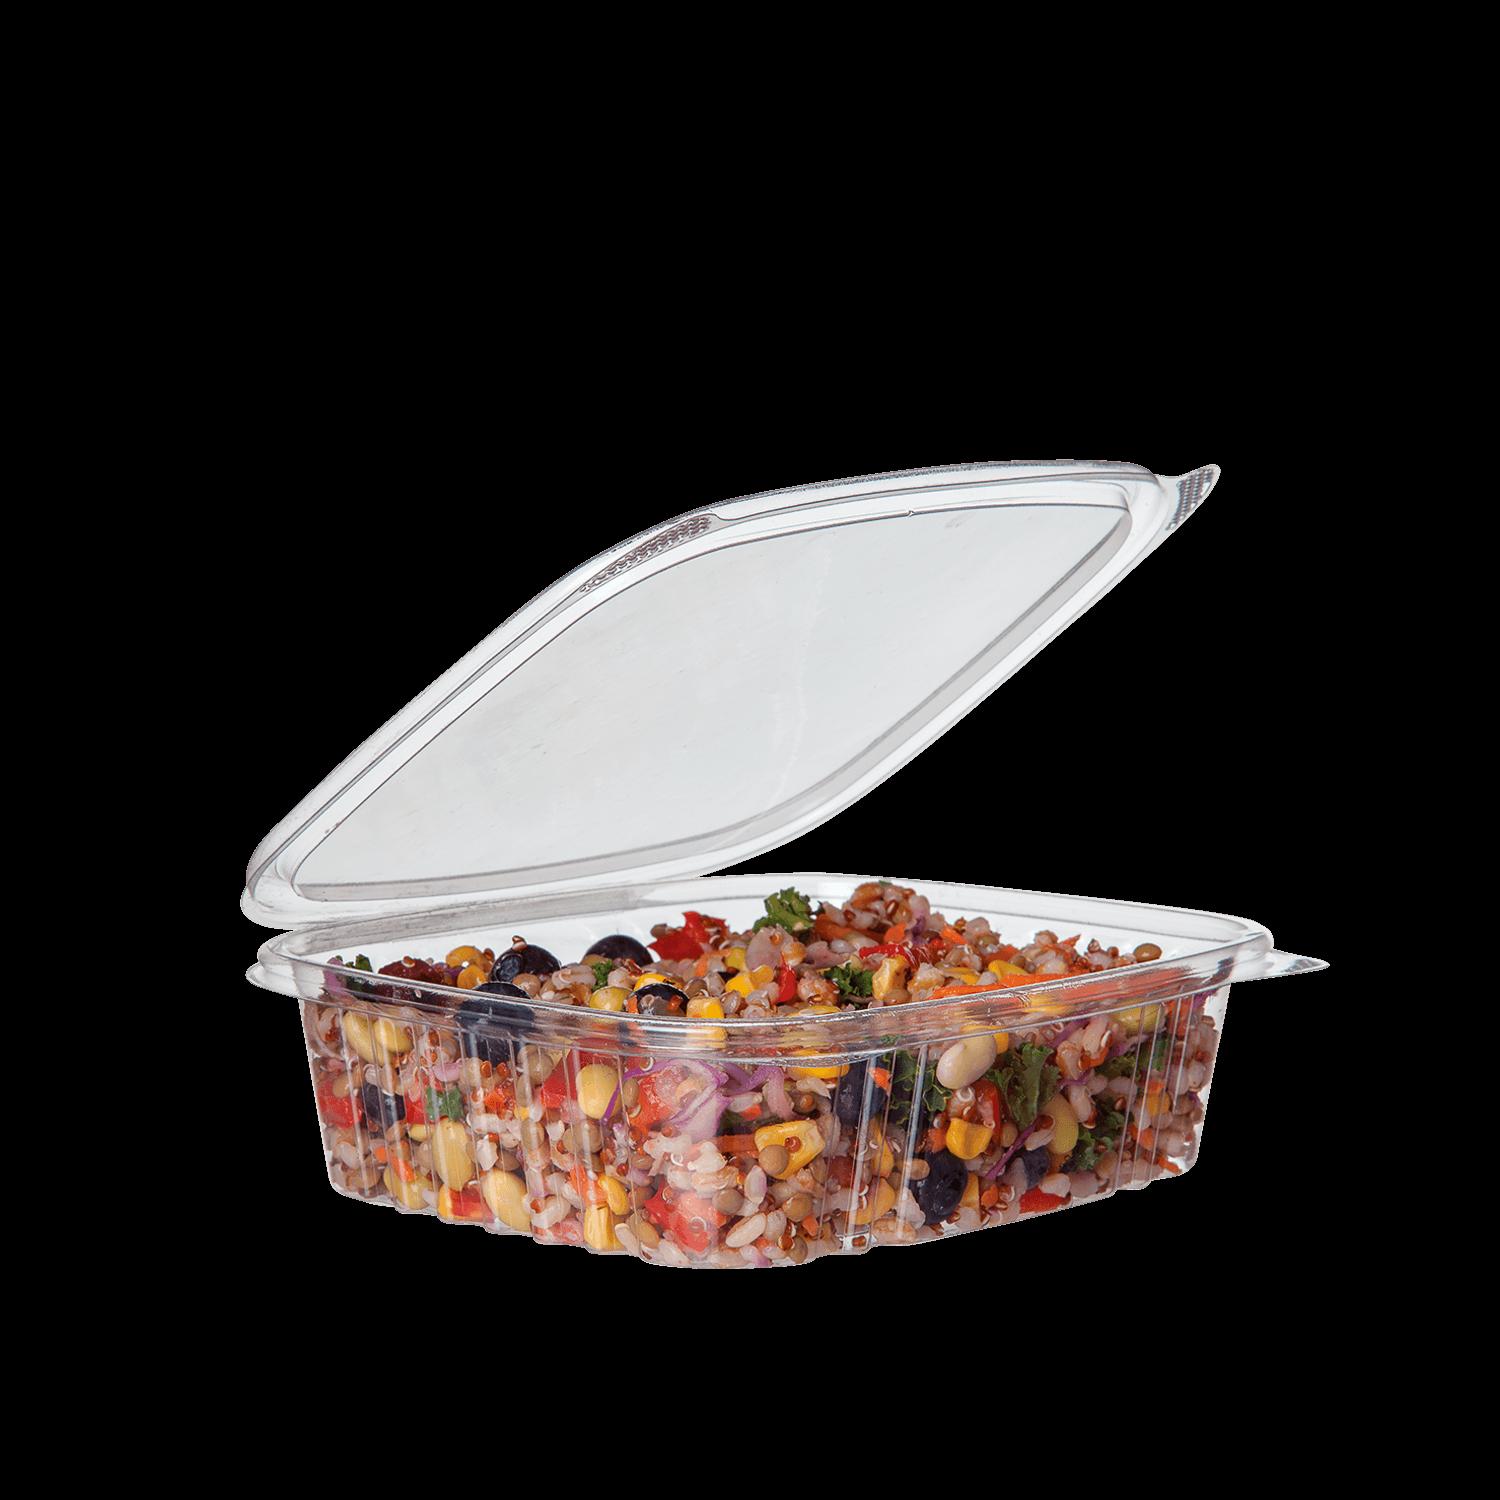 https://www.detpak.com/globalassets/detpak/images/product/ecoproducts/y362s0064_detpak_24oz_pla_rectangular_deli_container_with_hinged_lid_eco_clear_webres.png